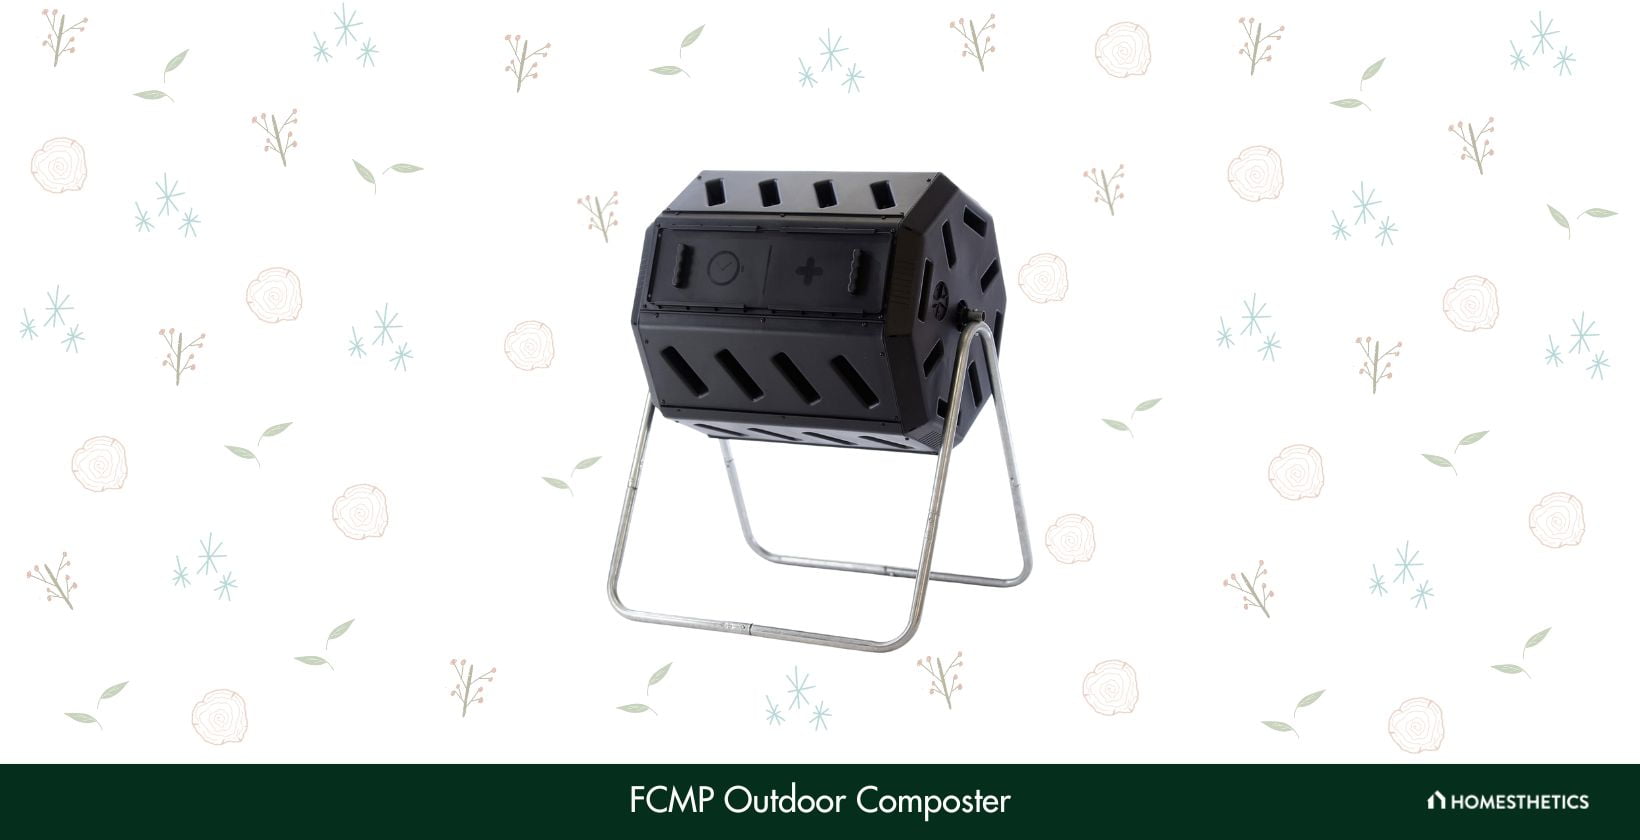 FCMP Outdoor Composter